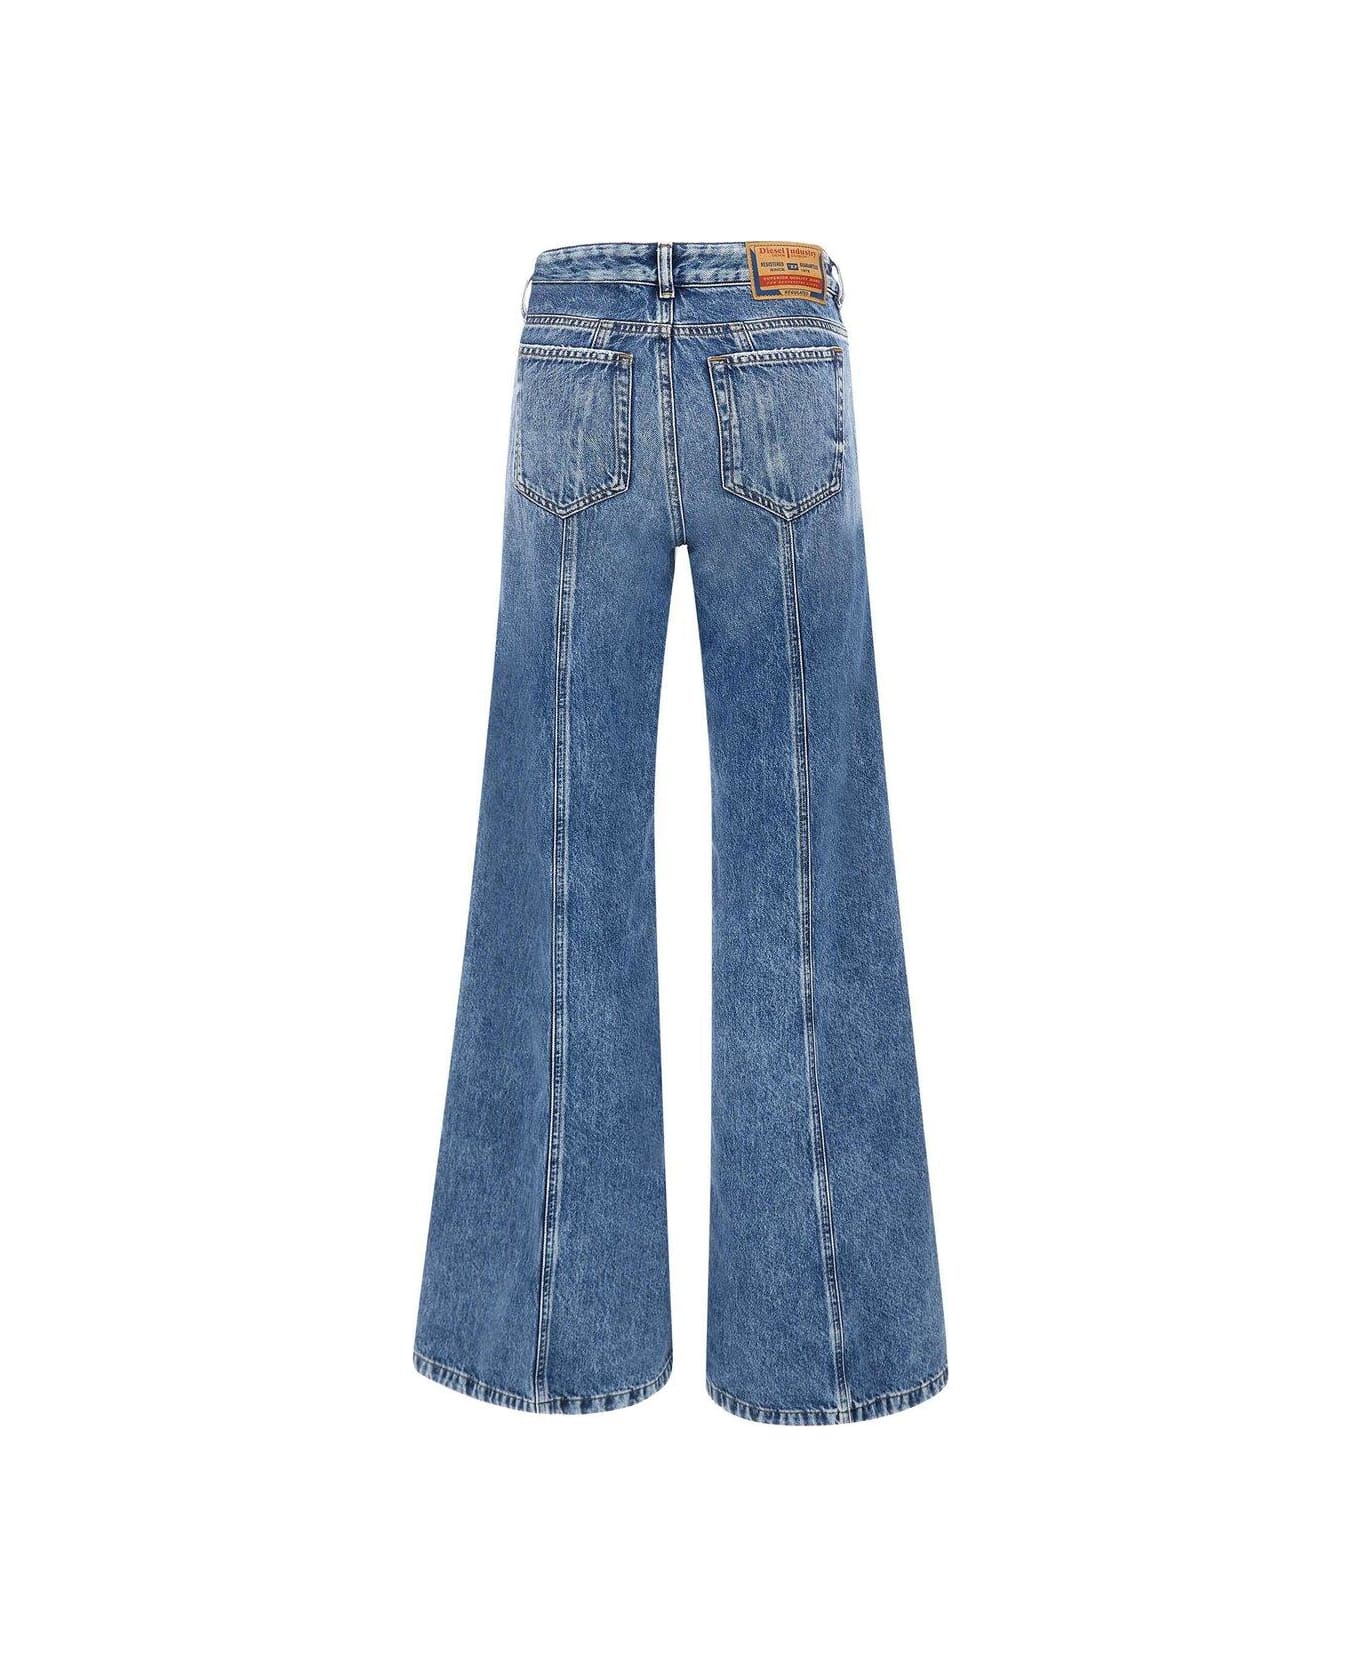 Diesel D-akii Flared Panelled Jeans - Stone Washed